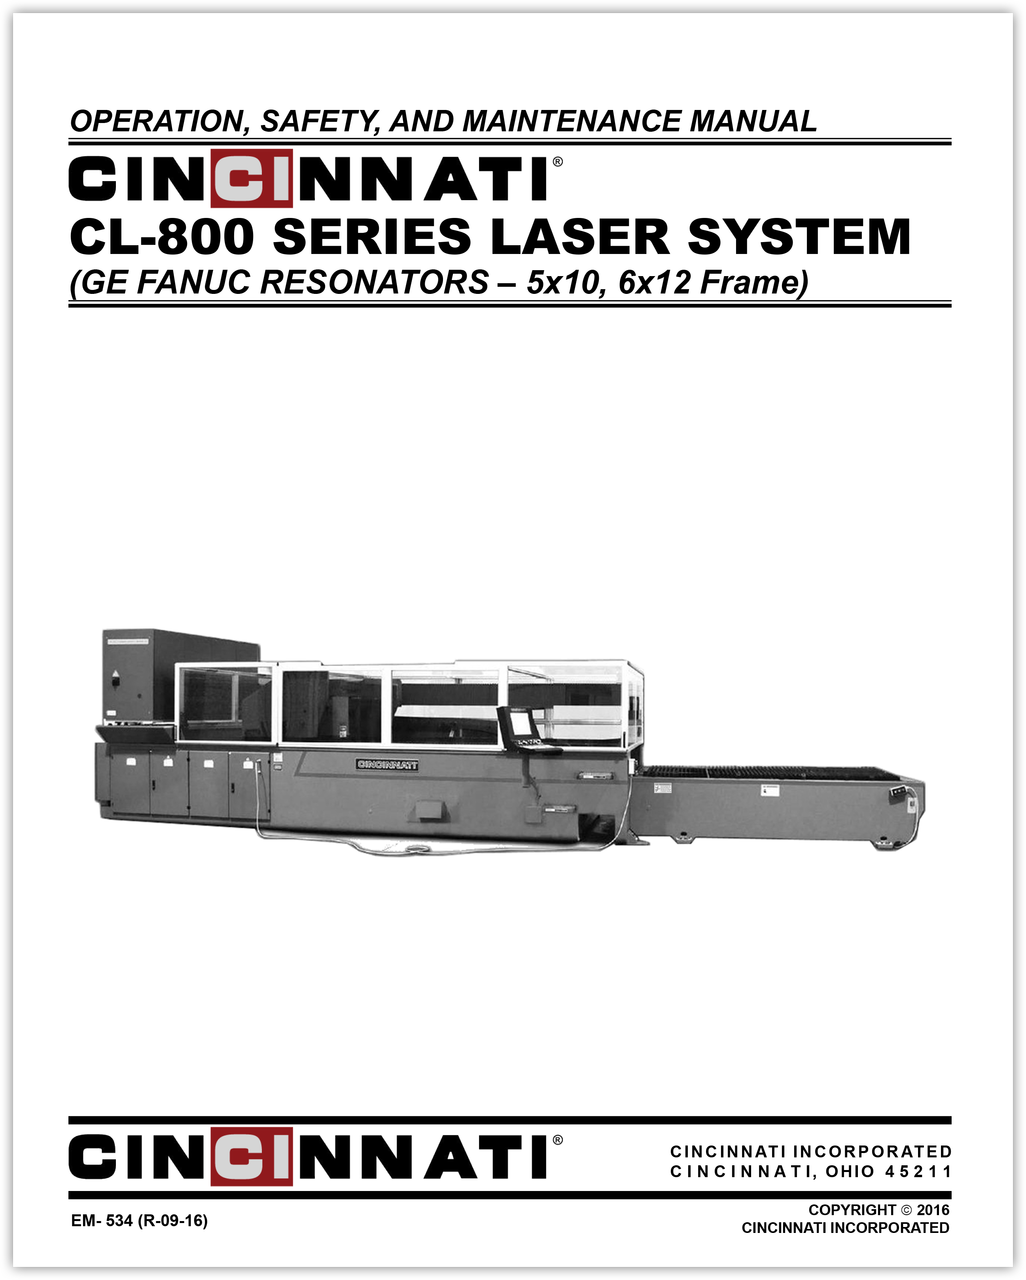 EM-534 (R-09-16) CL-800 Series Laser System_Operation, Safety and Maintenance Manual